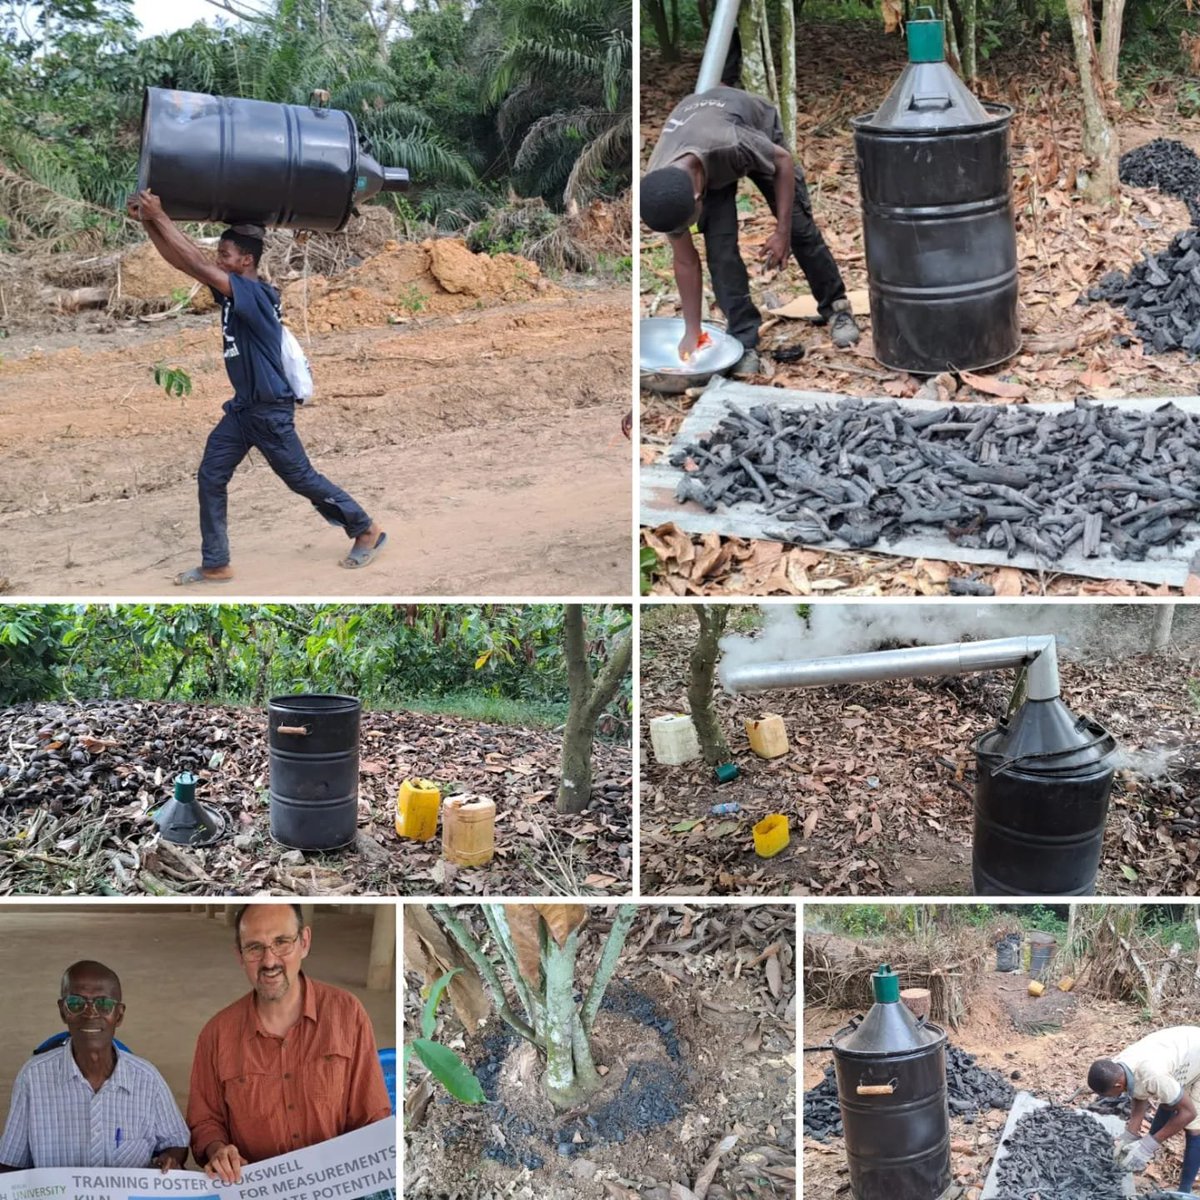 Great to see how well our charcoal making kilns are getting on in Ghana 🇬🇭 making charcoal, #biochar and #woodvinegar from a wide range of local feedstocks. 
Many thanks to Dr. Pfeiffer and Dr. Gyasi for this deep field research on decentralised mobile #pyrolisis using our kilns.